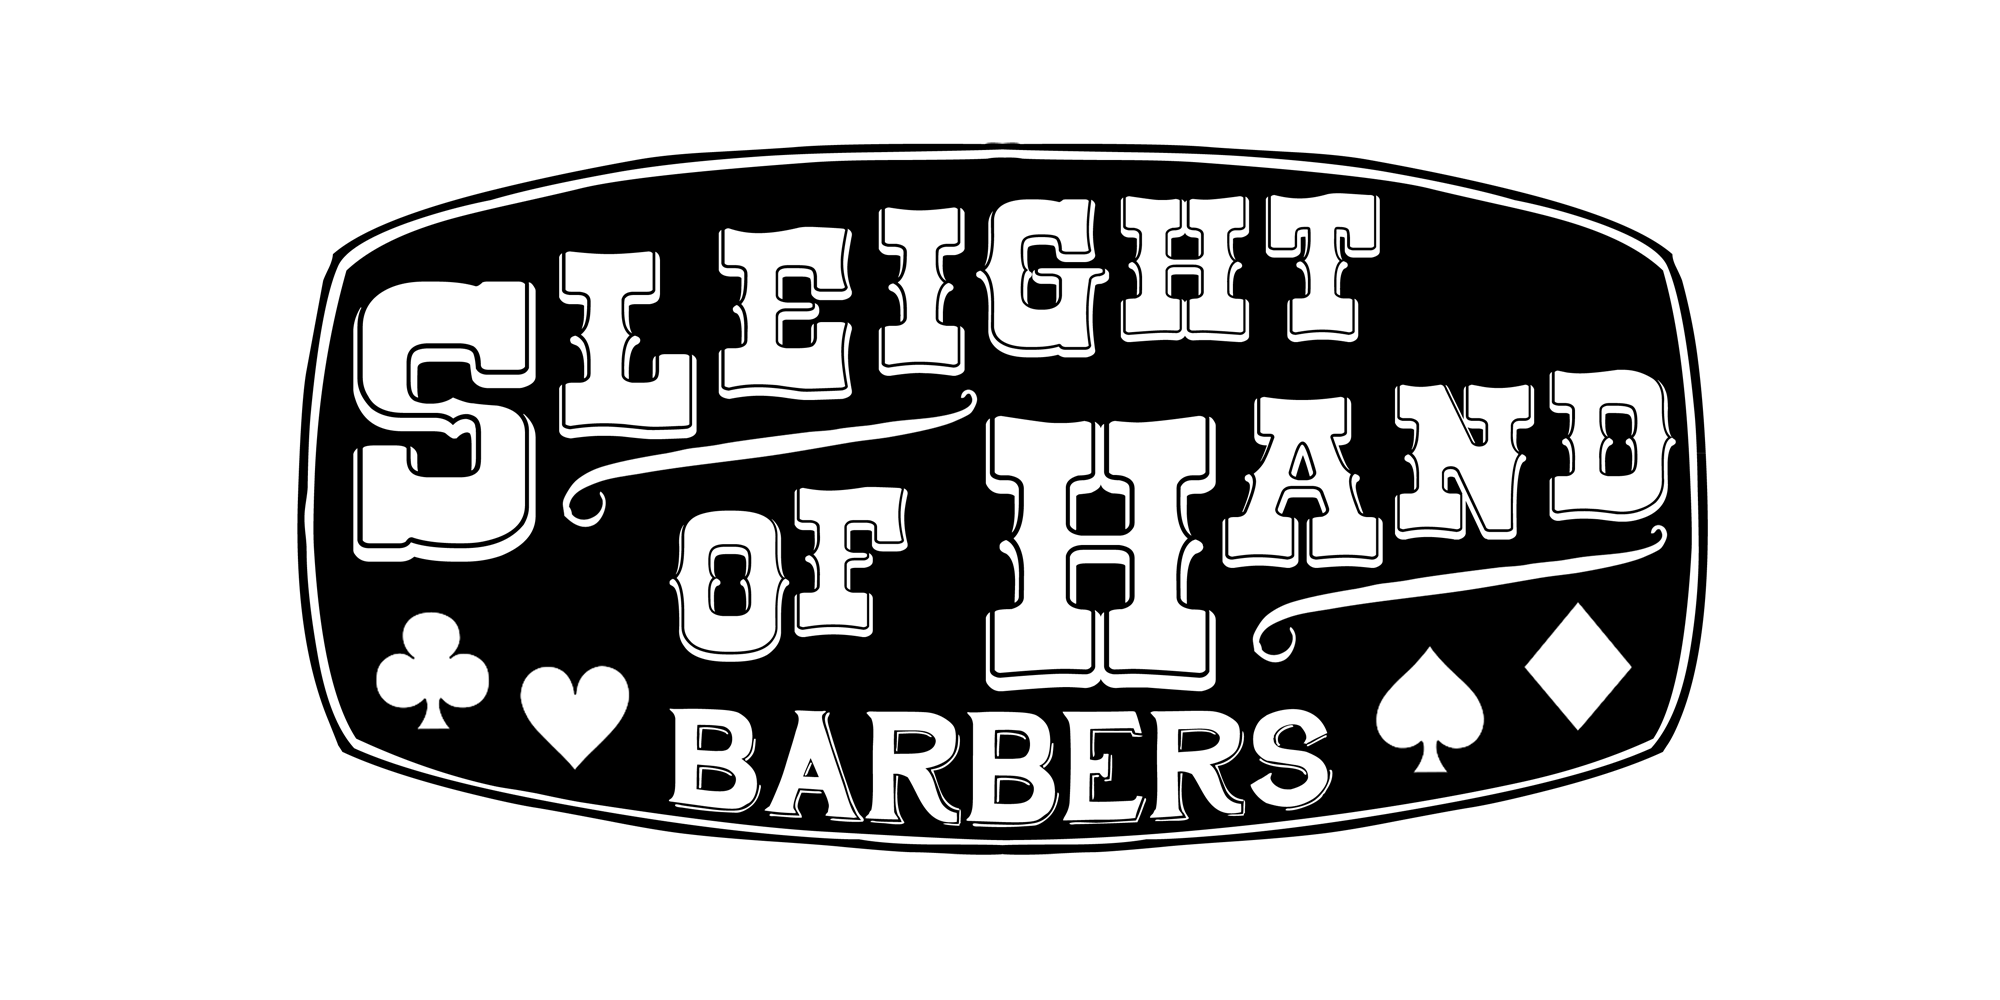 Offering the finest haircuts. Haircut clipart female barber